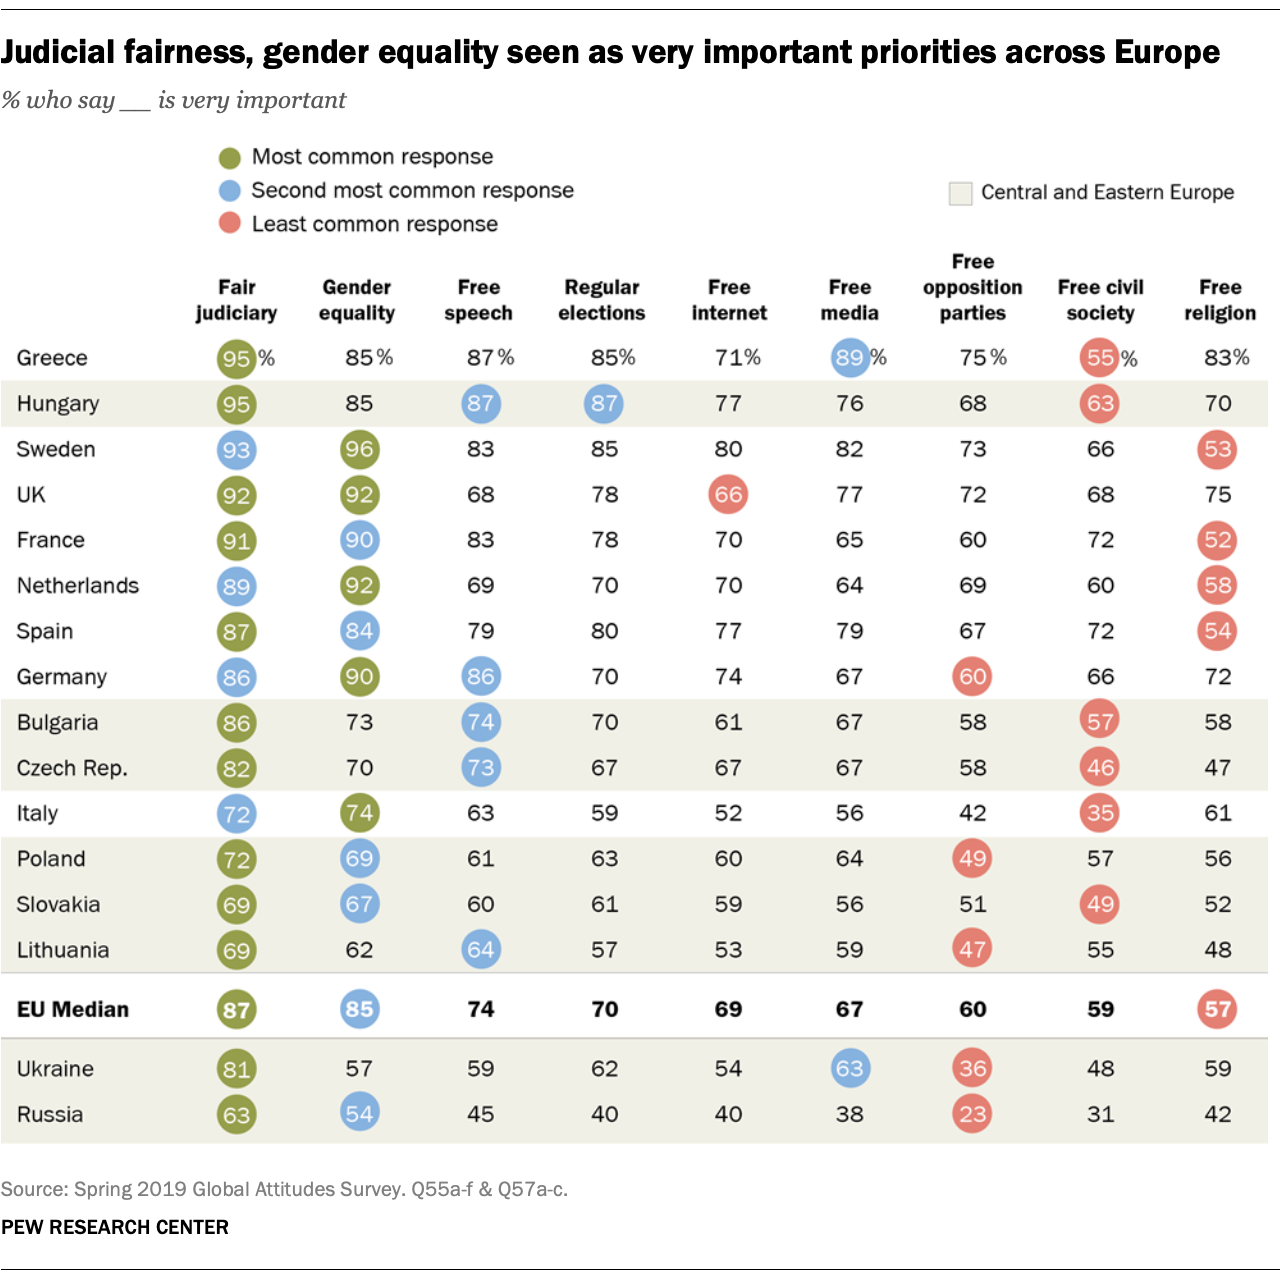 Judicial fairness, gender equality seen as very important priorities across Europe